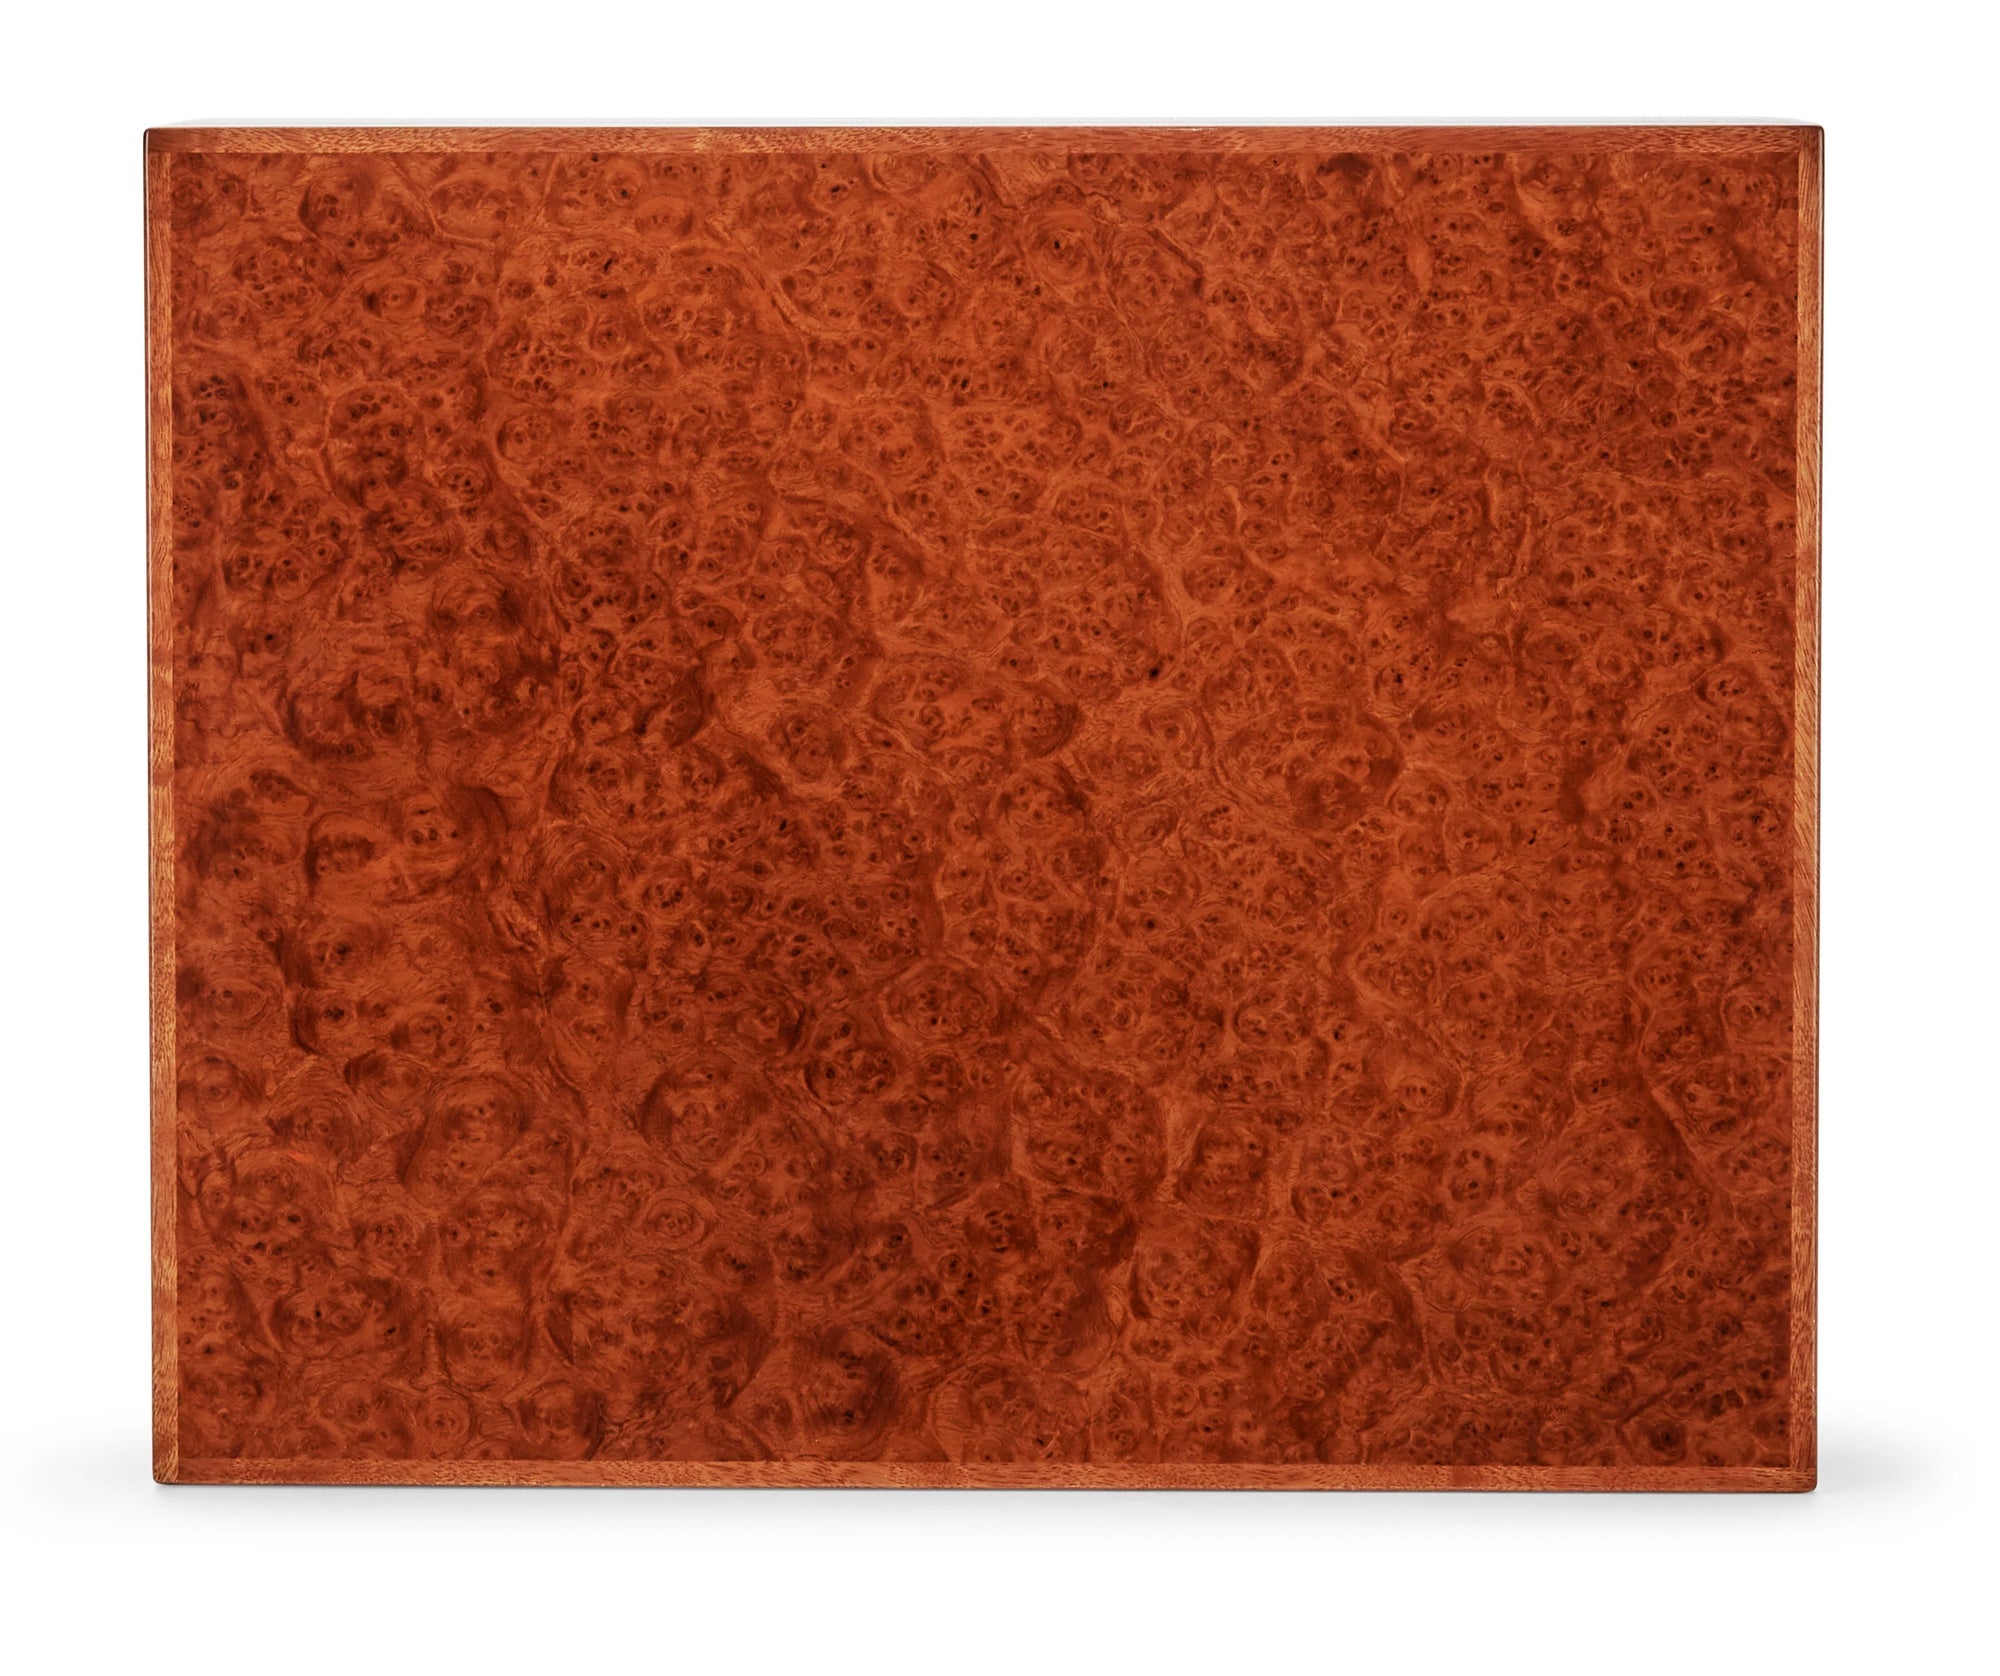 An image of a red Elie Bleu Amboyna Burl "Classic" Humidor - 110 Cigars on a white background, featuring Elie Bleu tabletop humidors and cigar collection.